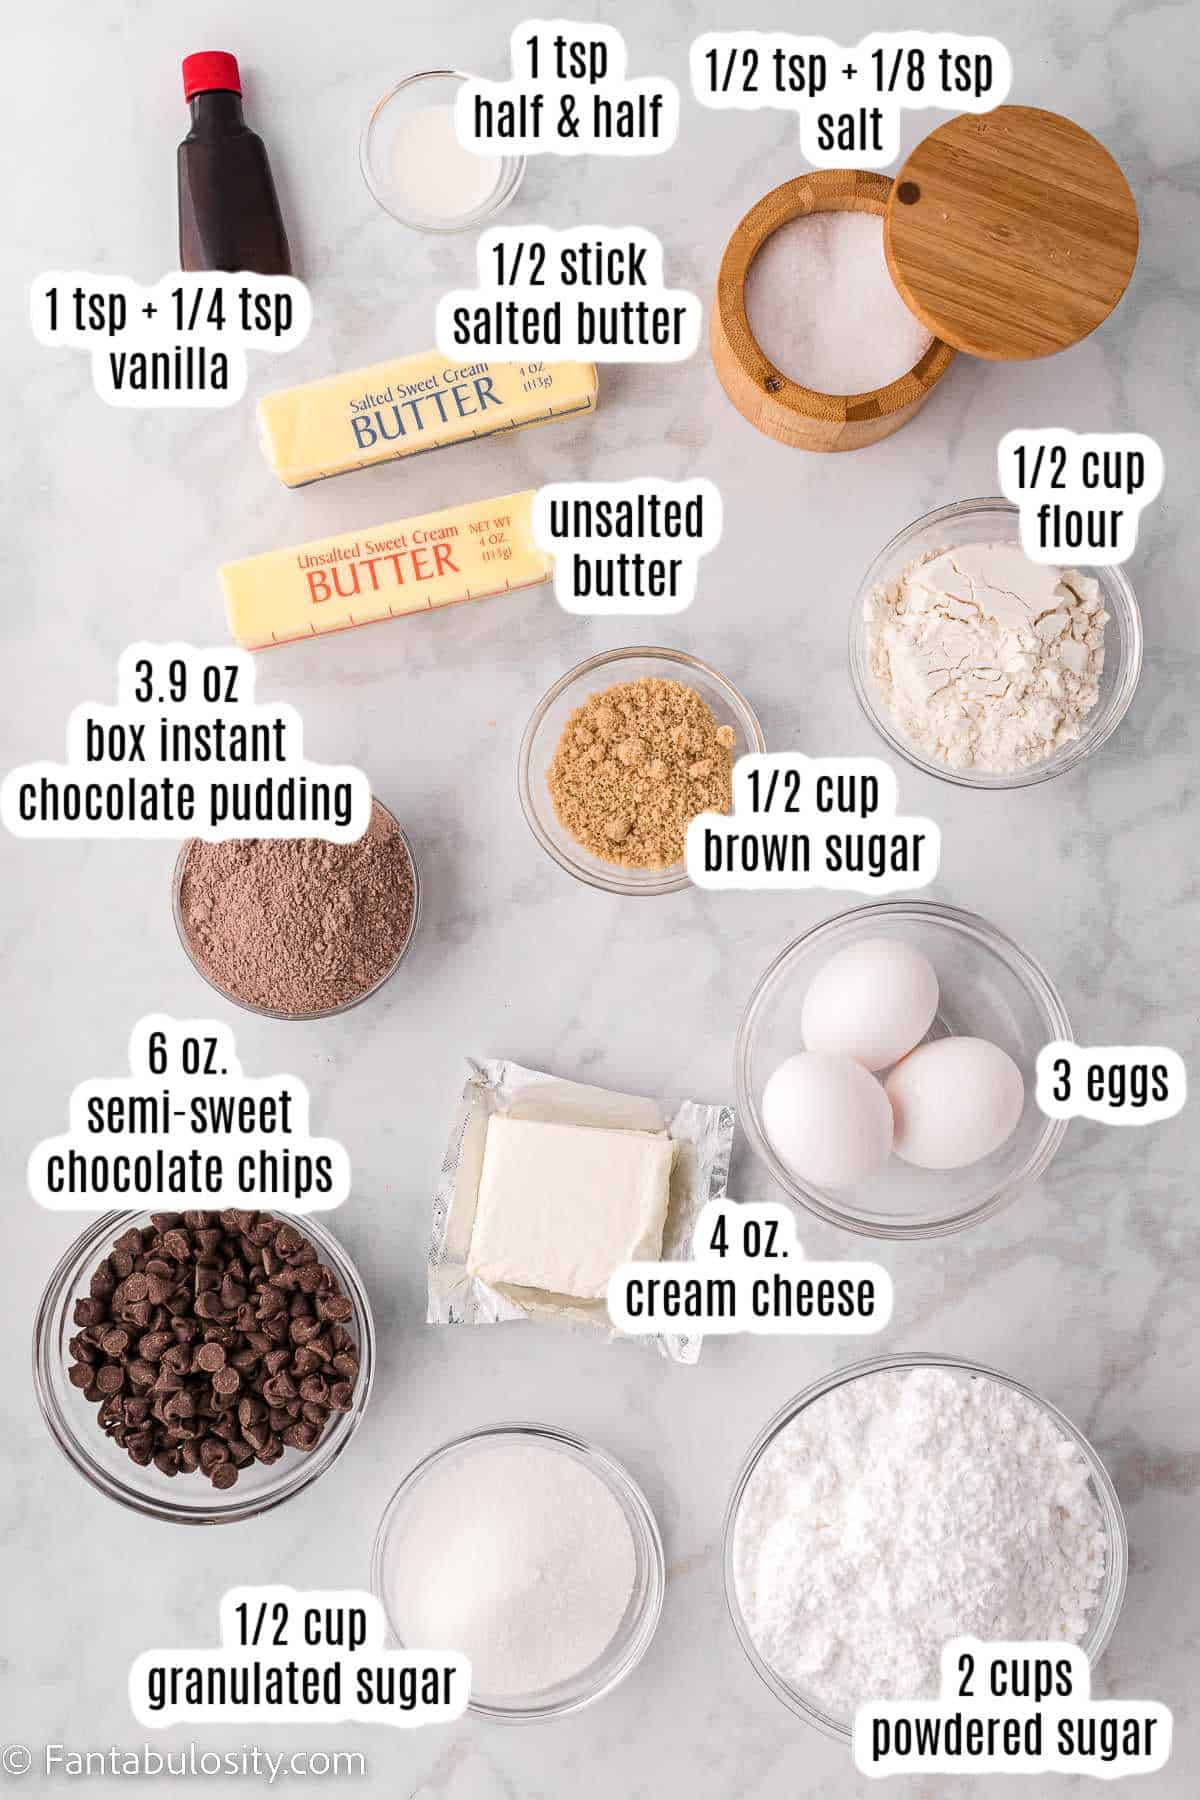 Labeled ingredients for homemade brownies with cream cheese frosting.